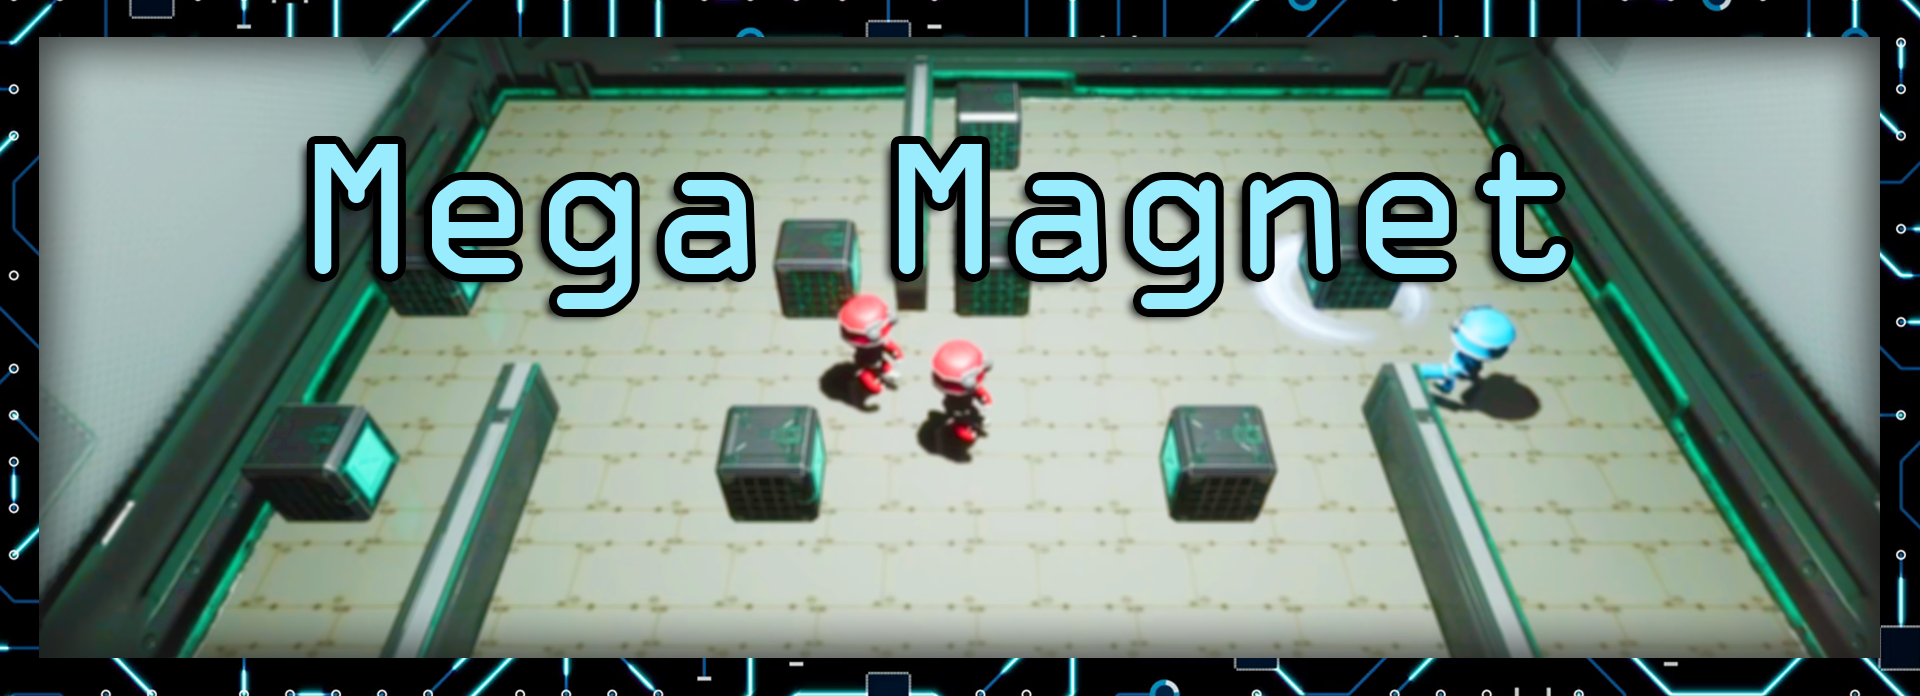 A title card for a top-down puzzle game called Mega Magnet by Charlie Mason